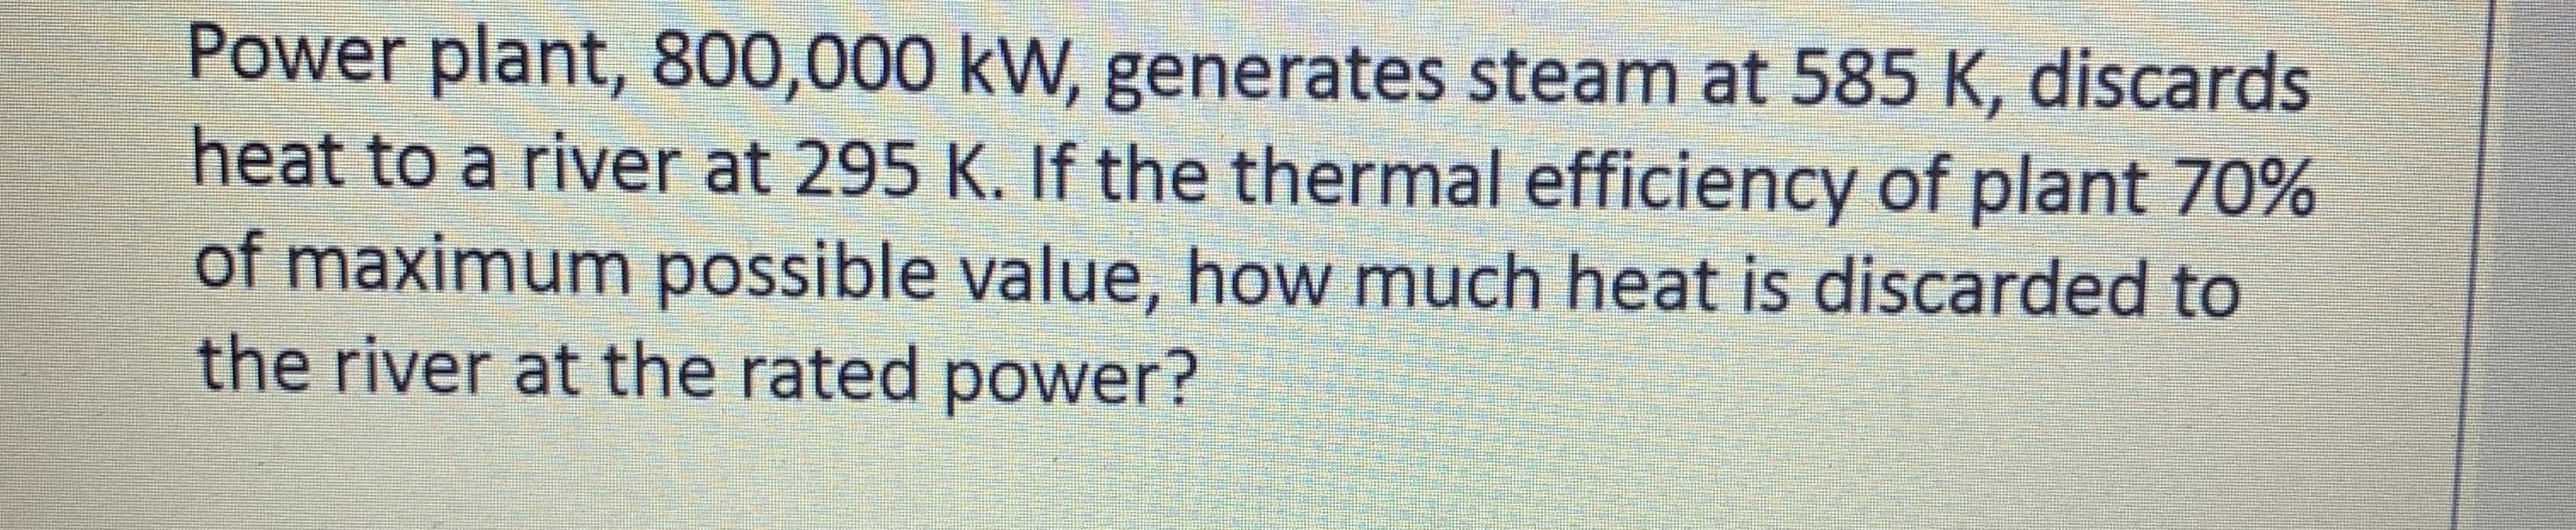 Power plant, 800,000 kW, generates steam at 585 K, discards
heat to a river at 295 K. If the thermal efficiency of plant 70%
of maximum possible value, how much heat is discarded to
the river at the rated power?
